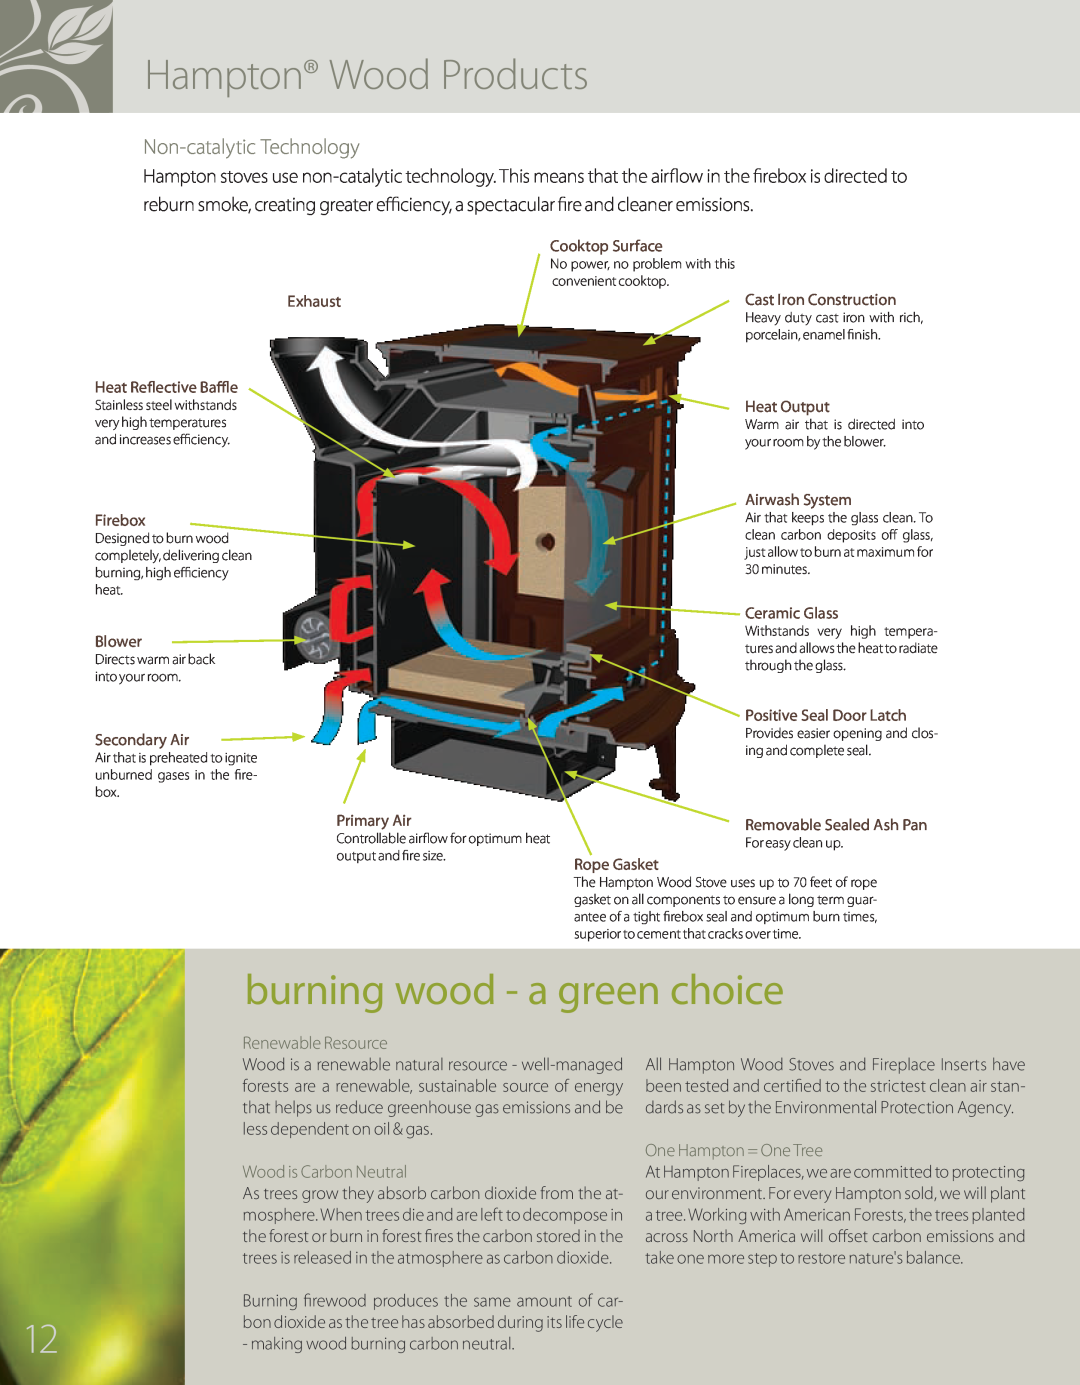 Regency HI200, H200, H15 Hampton Wood Products, burning wood - a green choice, Non-catalyticTechnology, Renewable Resource 